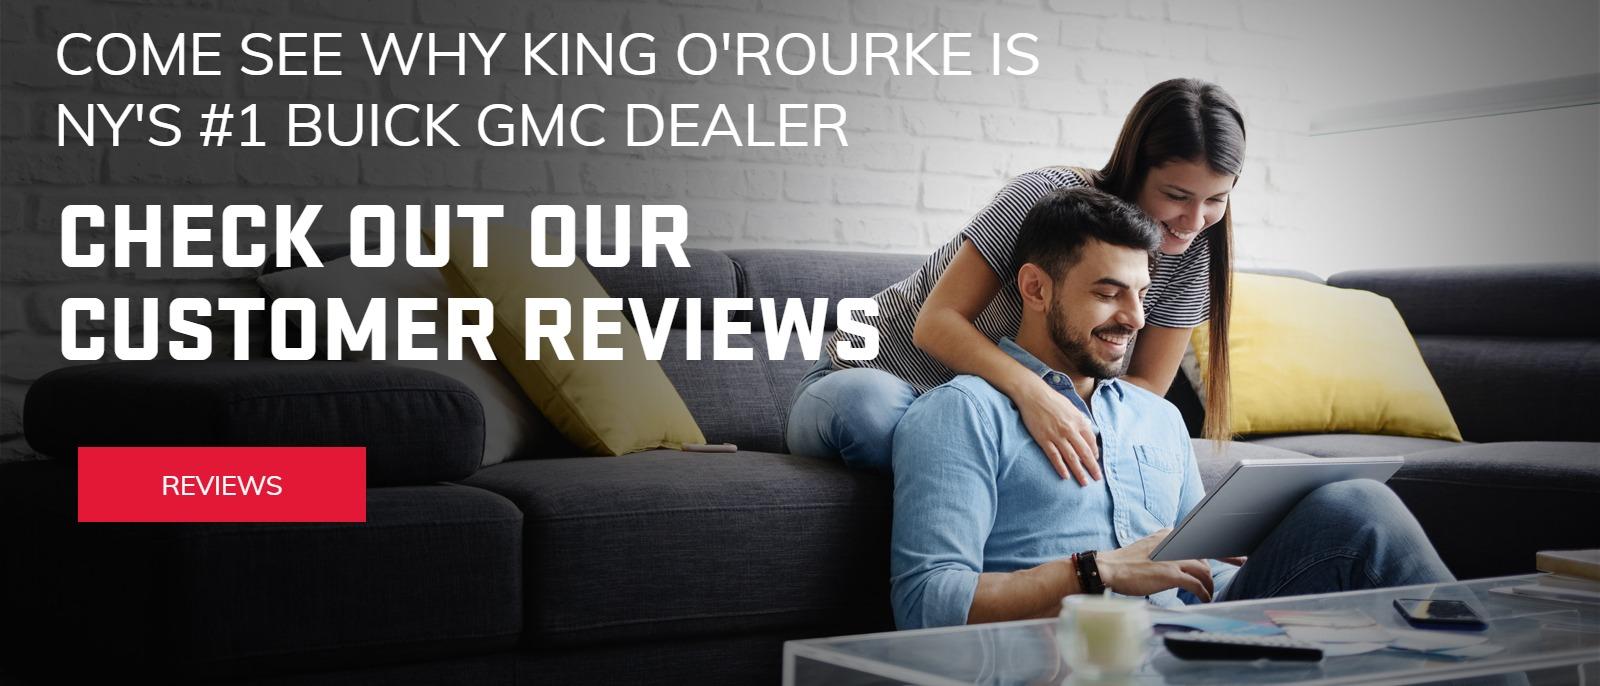 Customer Reviews for King O'Rourke Buick GMC in Smithtown, NY